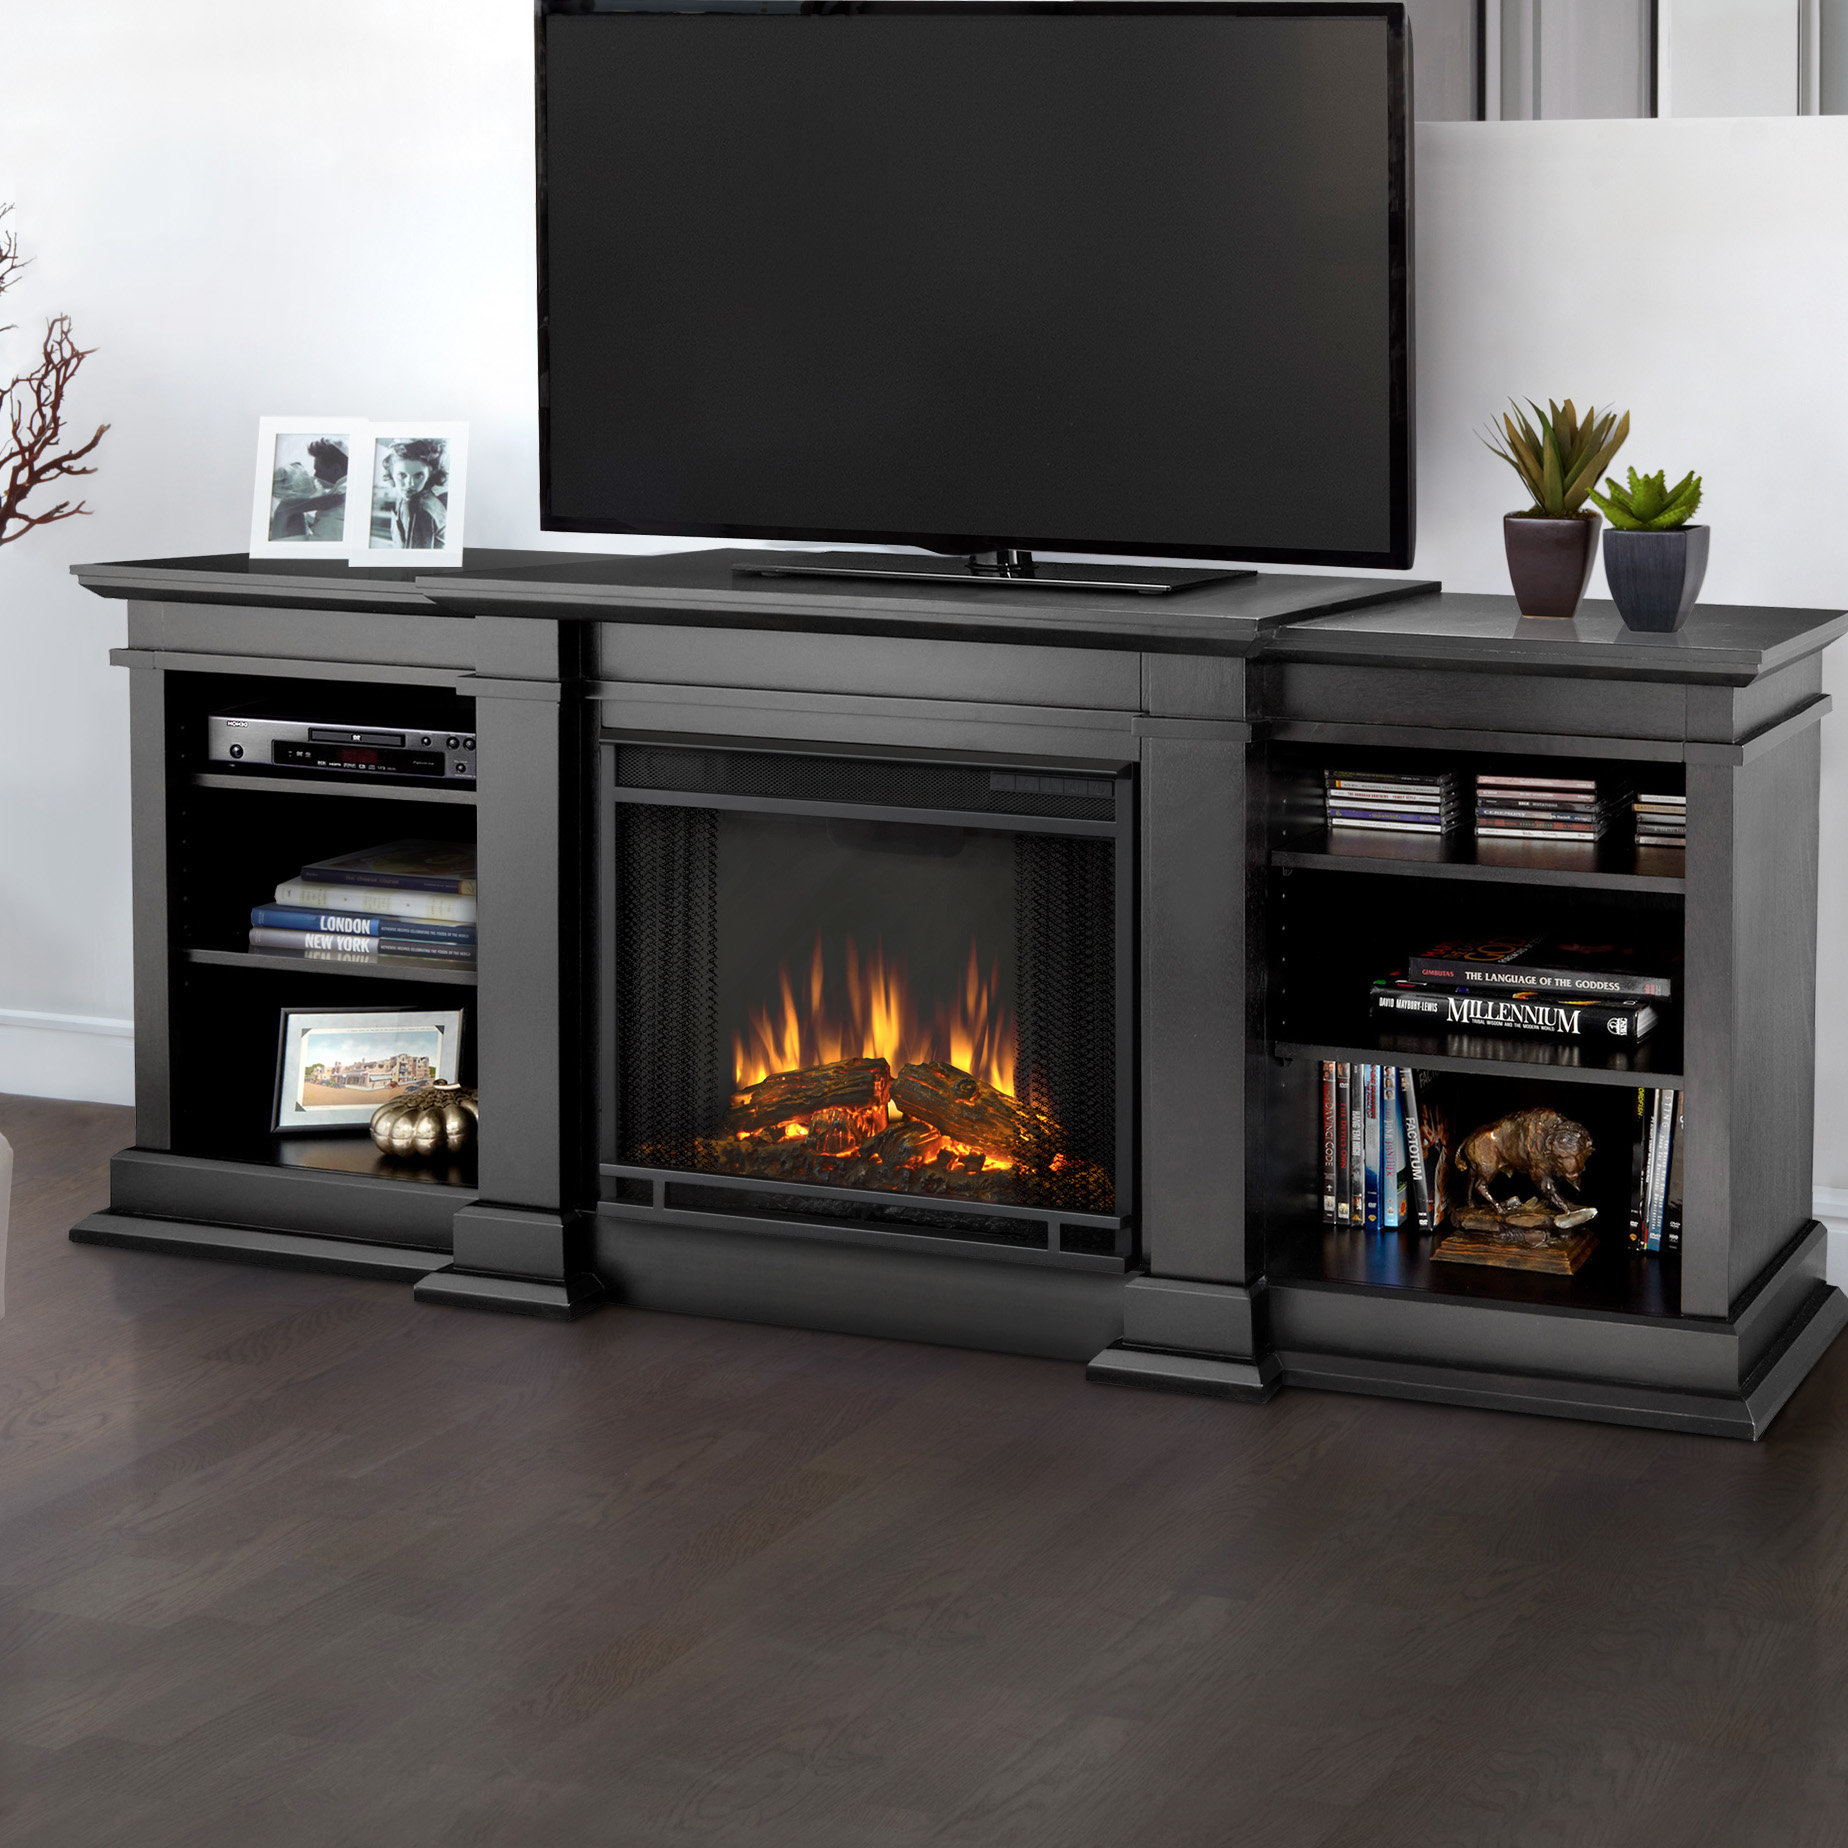 Fireplace Tv Stand with Bluetooth Speakers Elegant Entertainment Centers Entertainment Center with Fireplace